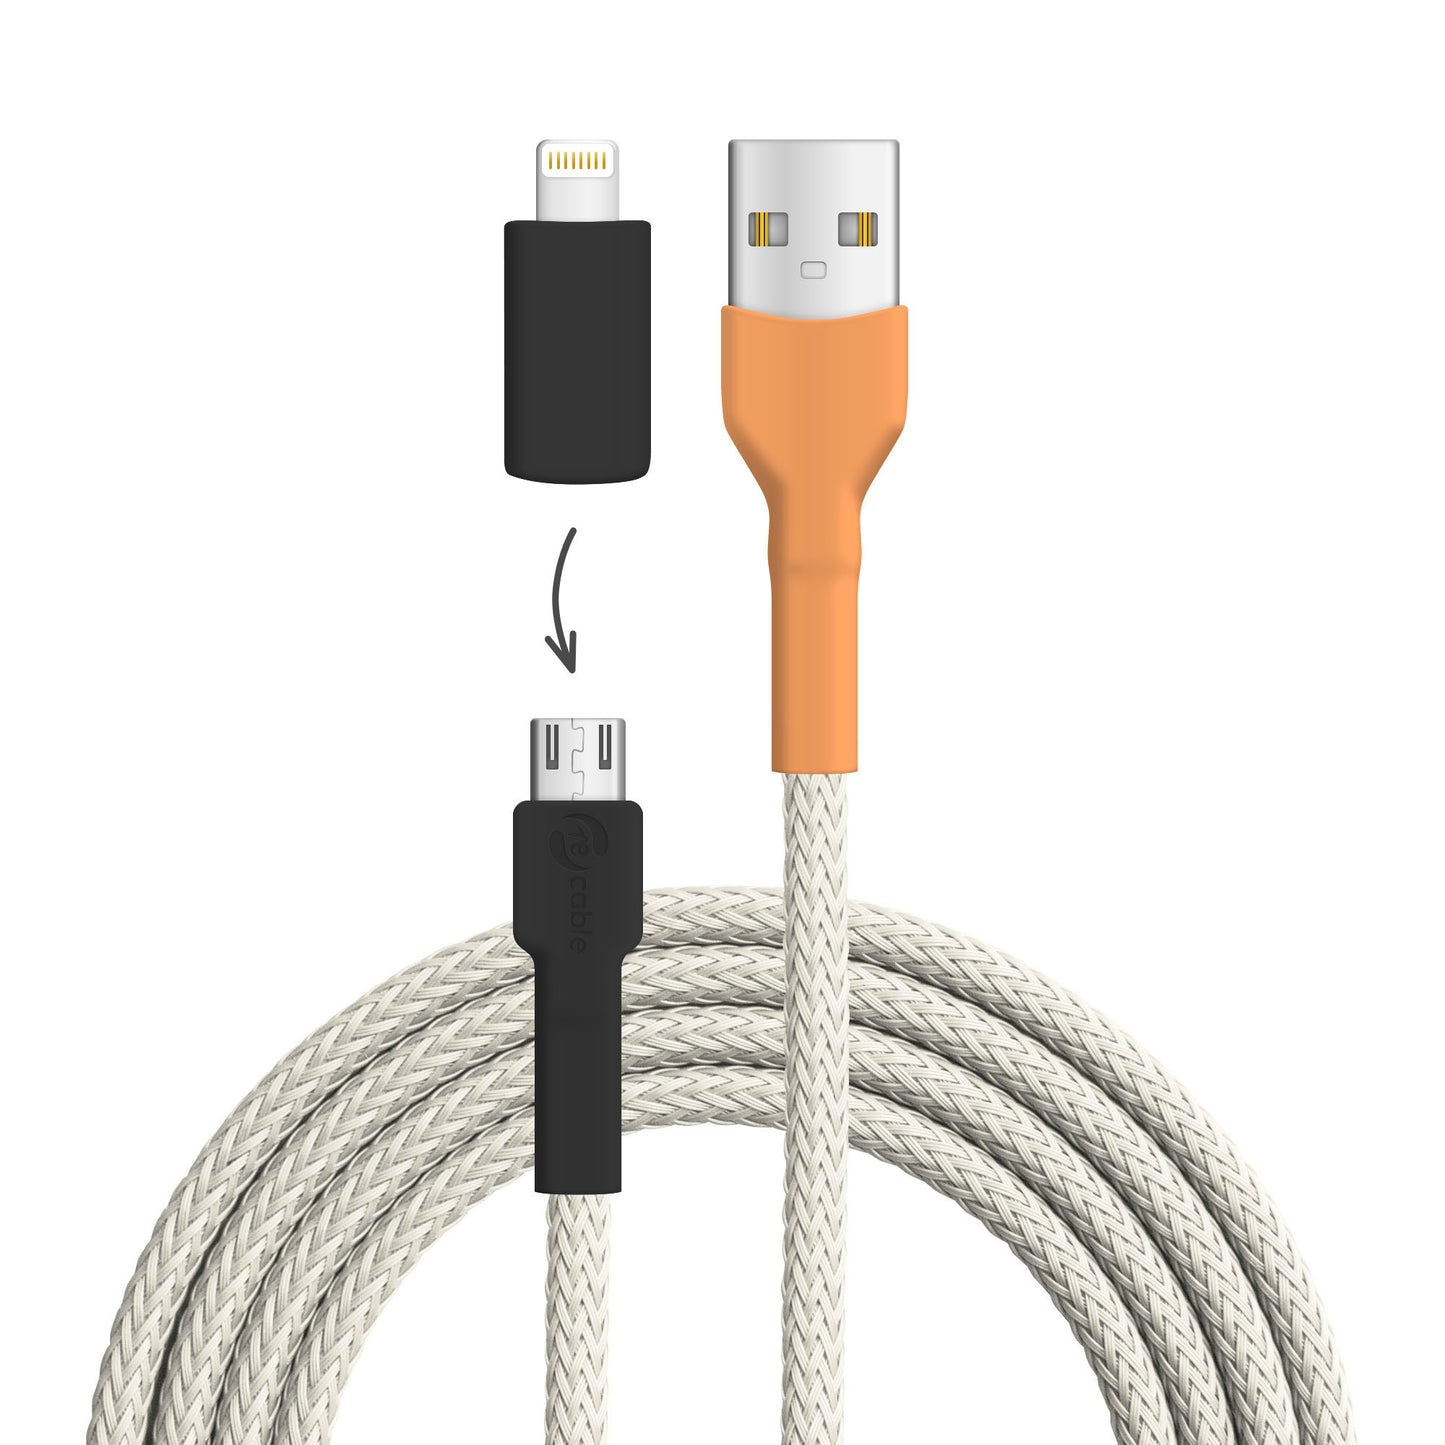 USB cable, design: King Penguin, connections: USB A to Micro-USB with Lightning adapter (not connected)